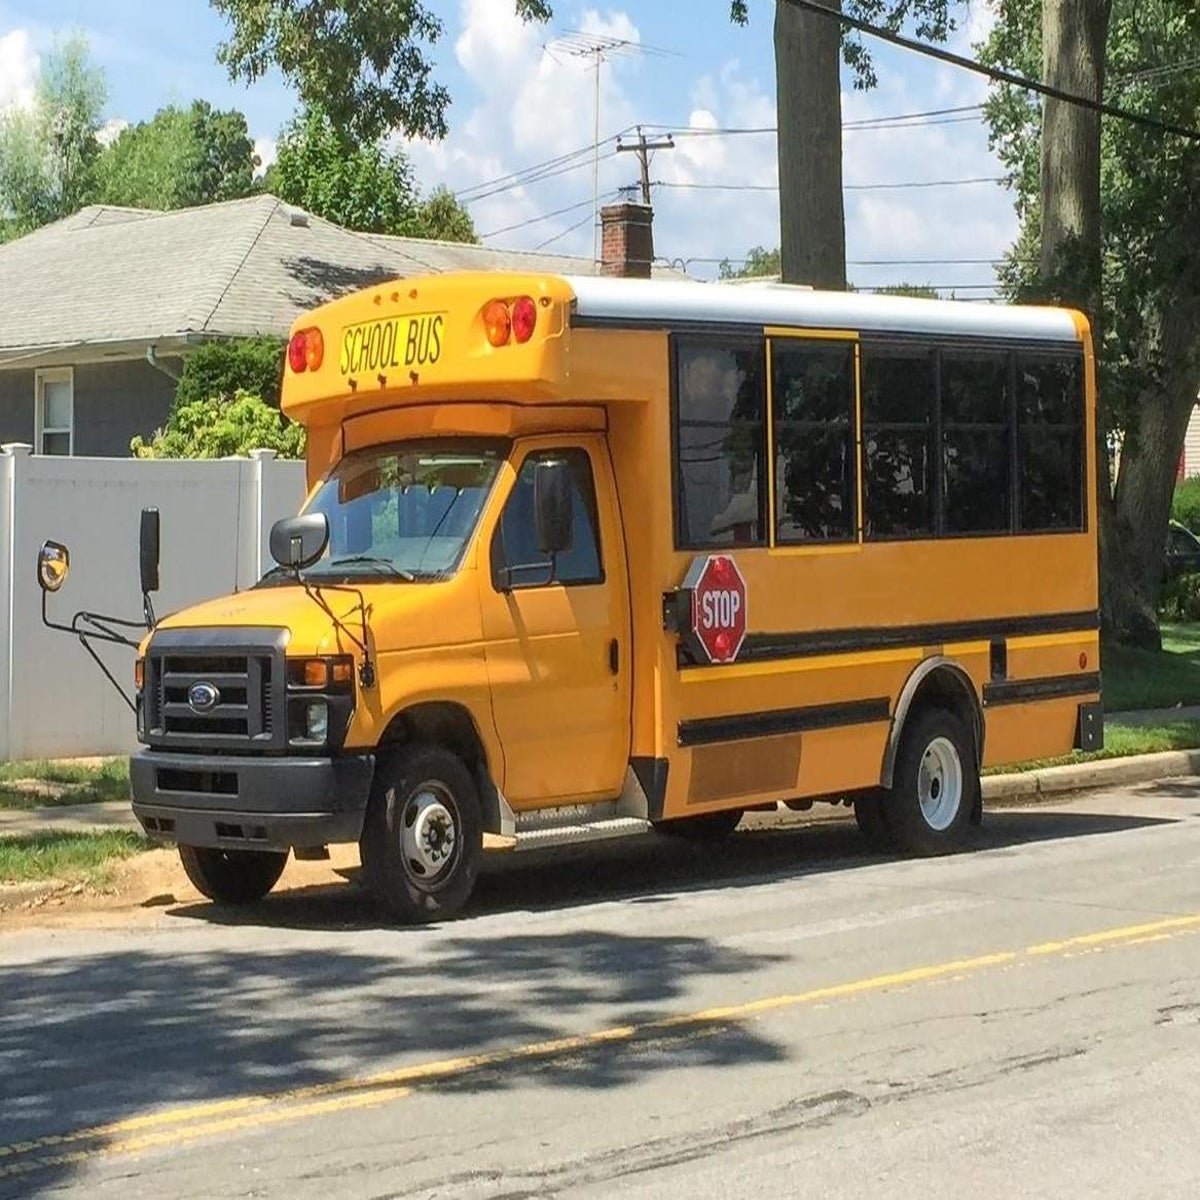 Teenage girl with disabilities sexually abused and raped by students on  school bus without driver intervening, lawsuit claims | The Independent |  The Independent